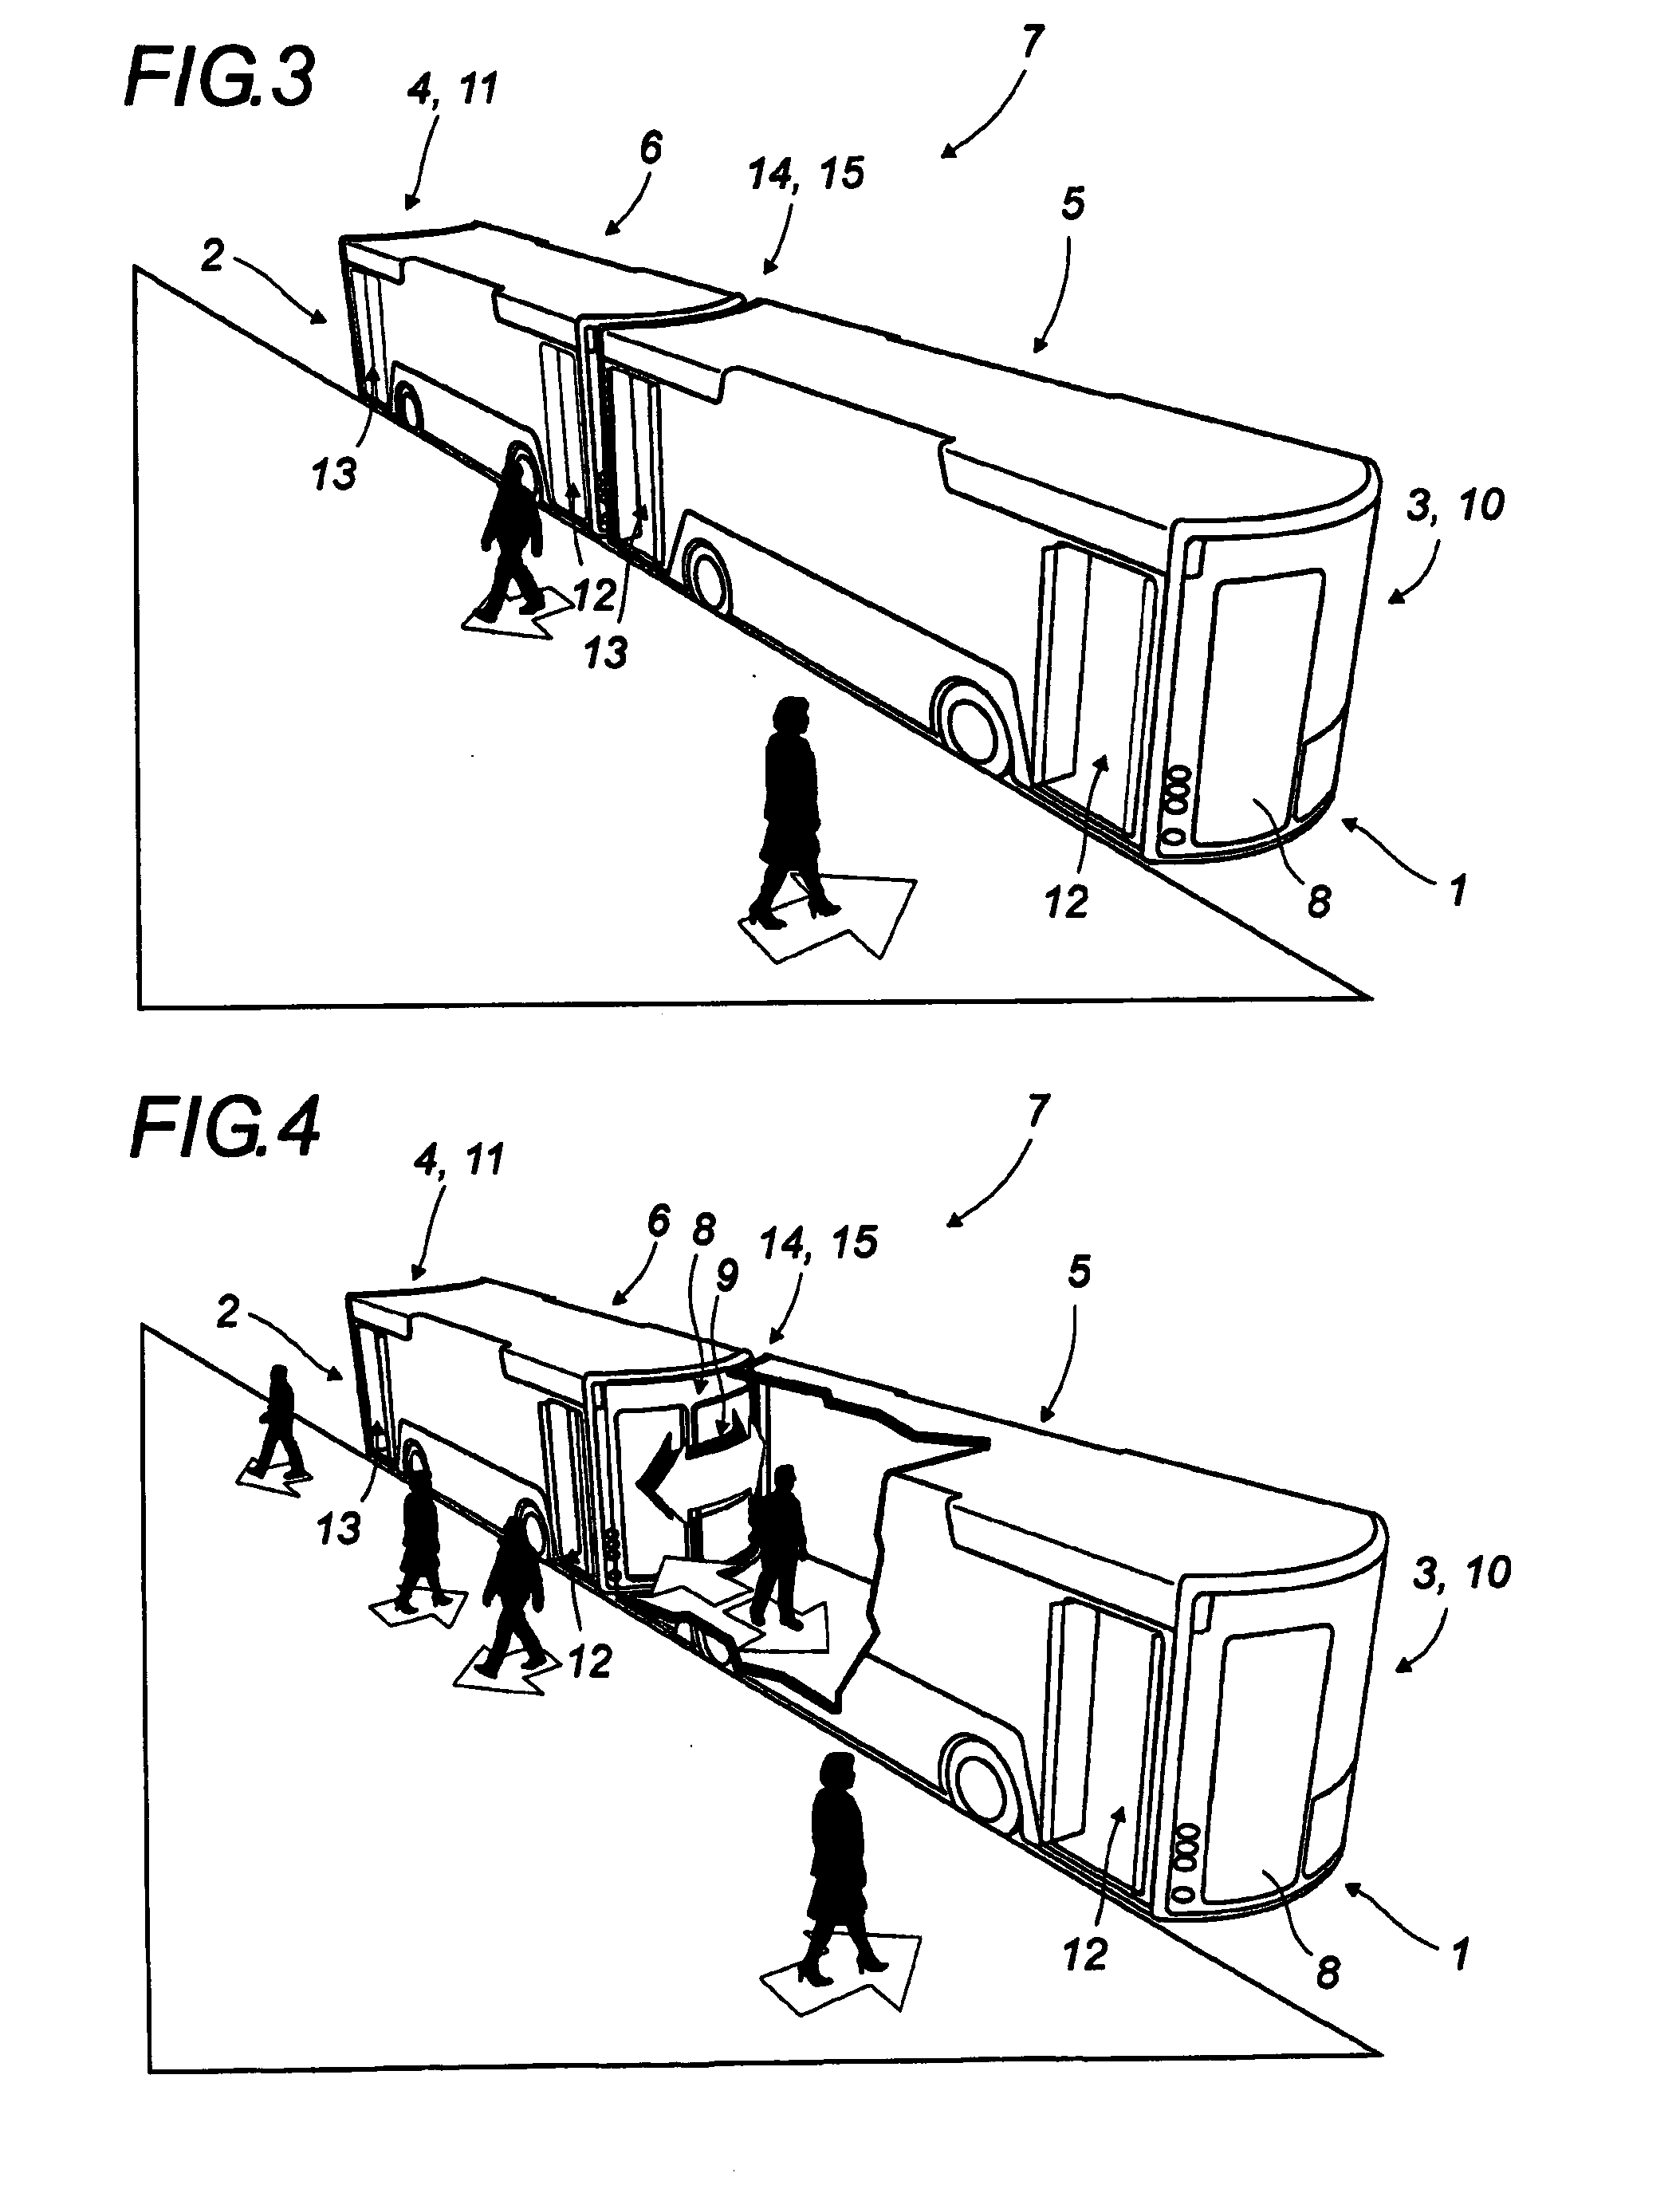 Motorized road vehicle for transporting passengers, capable of running alone and of being articulaetd to other vehicles to form a road train